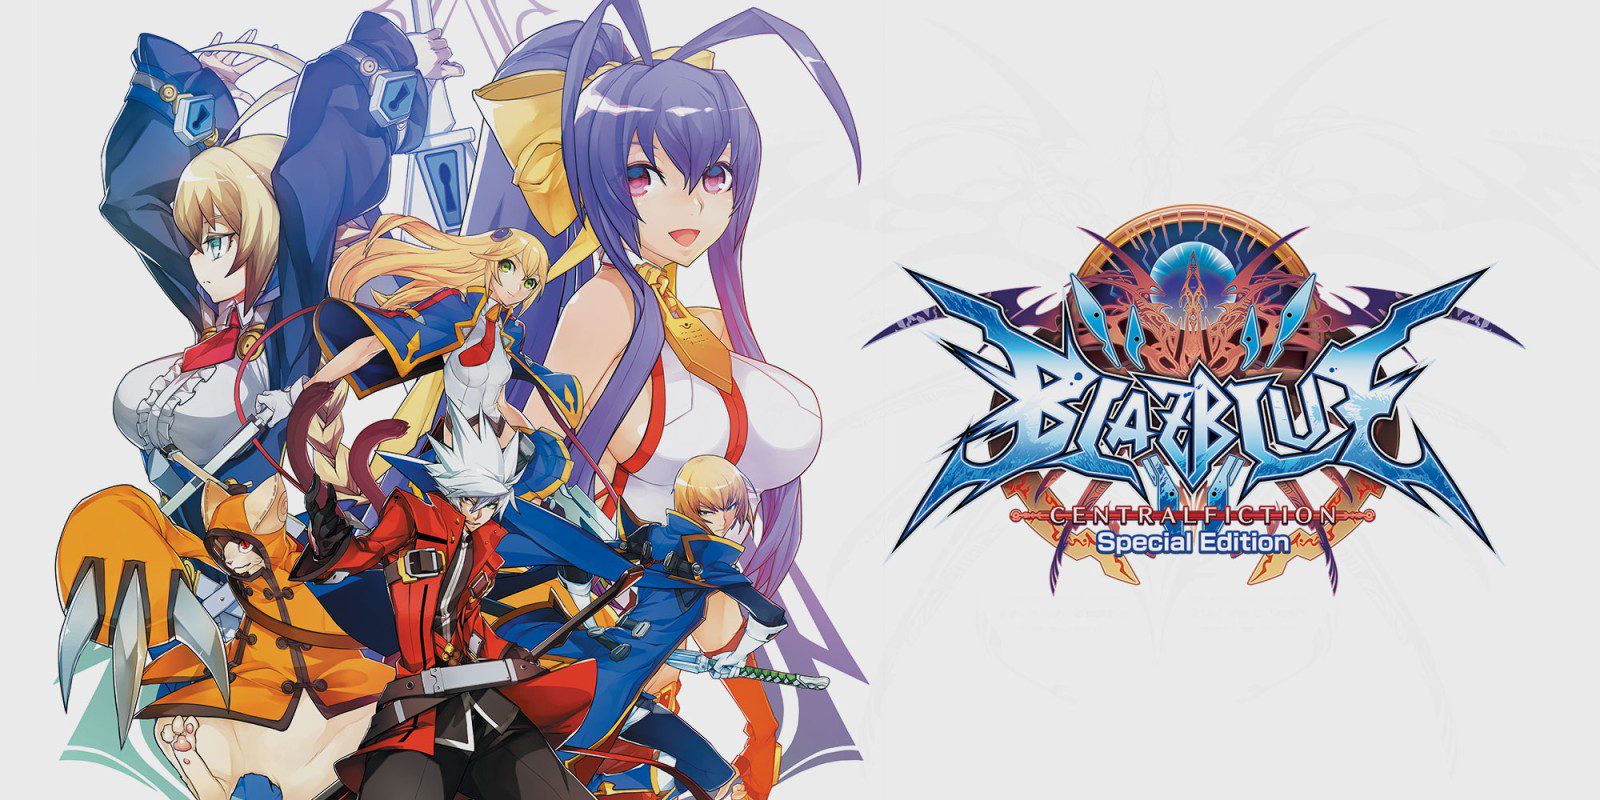 BLAZBLUE CENTRALFICTION Special Edition lands on Nintendo Switch in the Europe